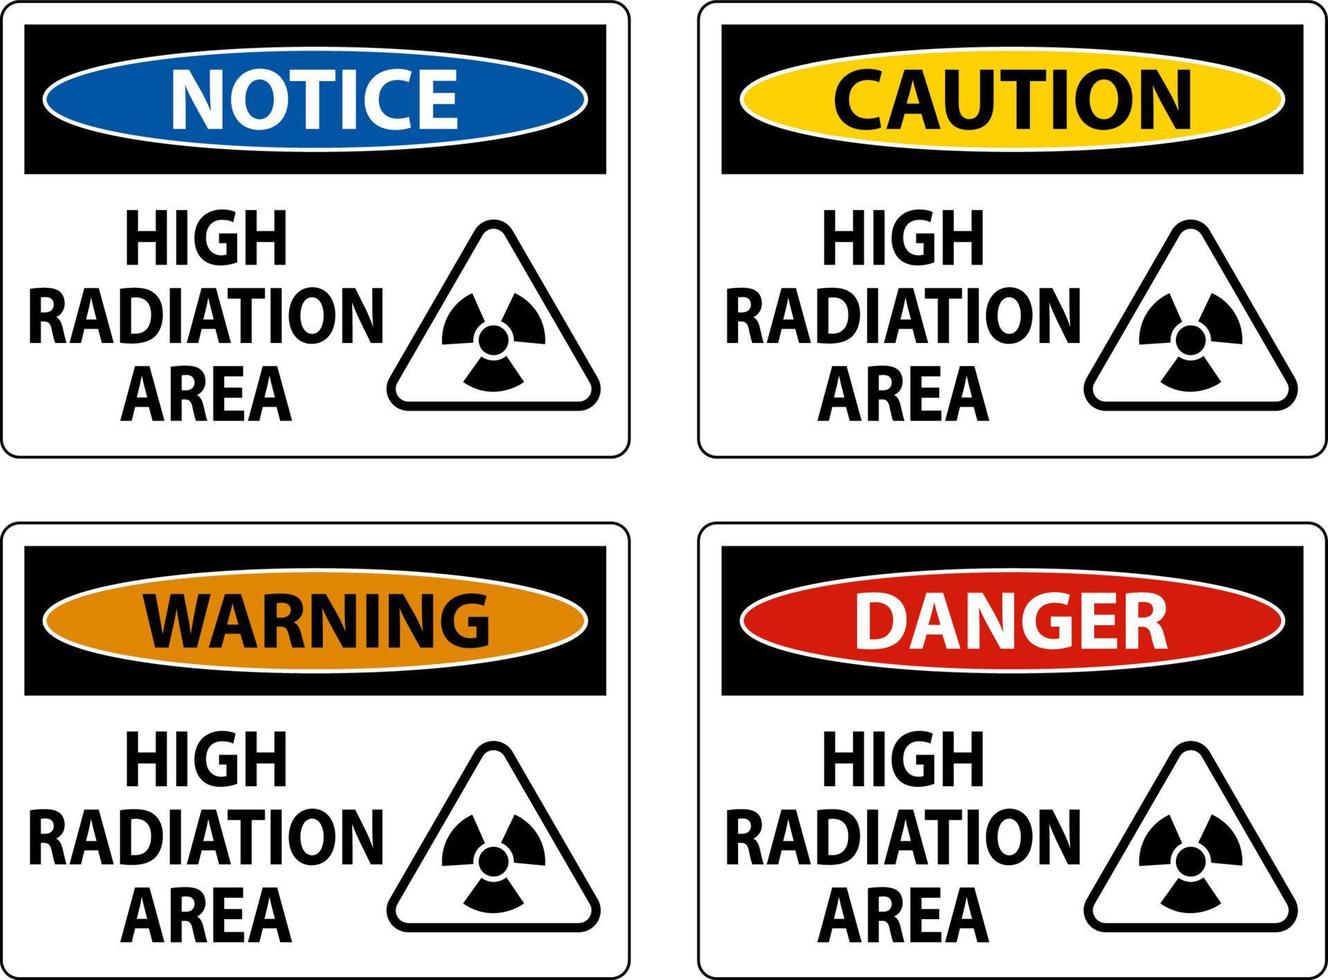 Caution High Radiation Area Sign On White Background vector